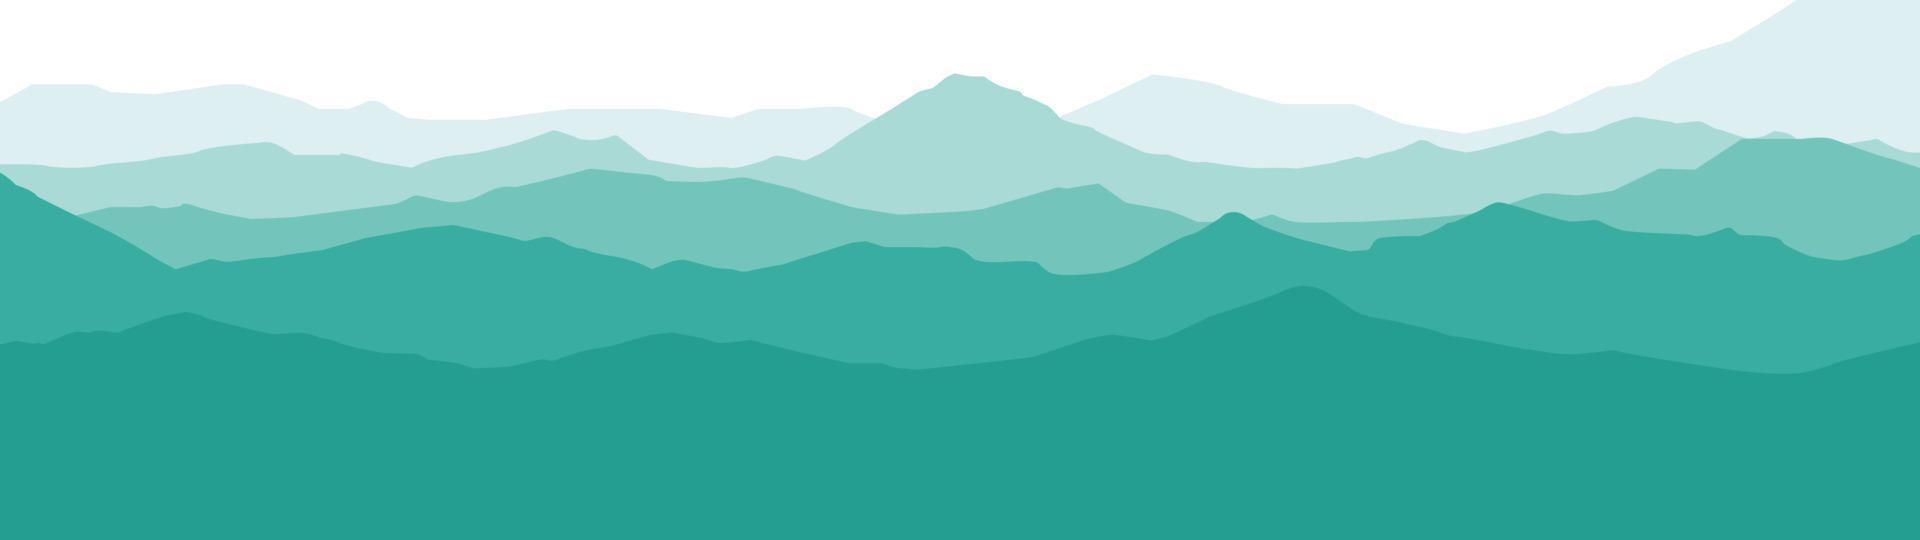 Vector illustration of mountains.EPS10 file.